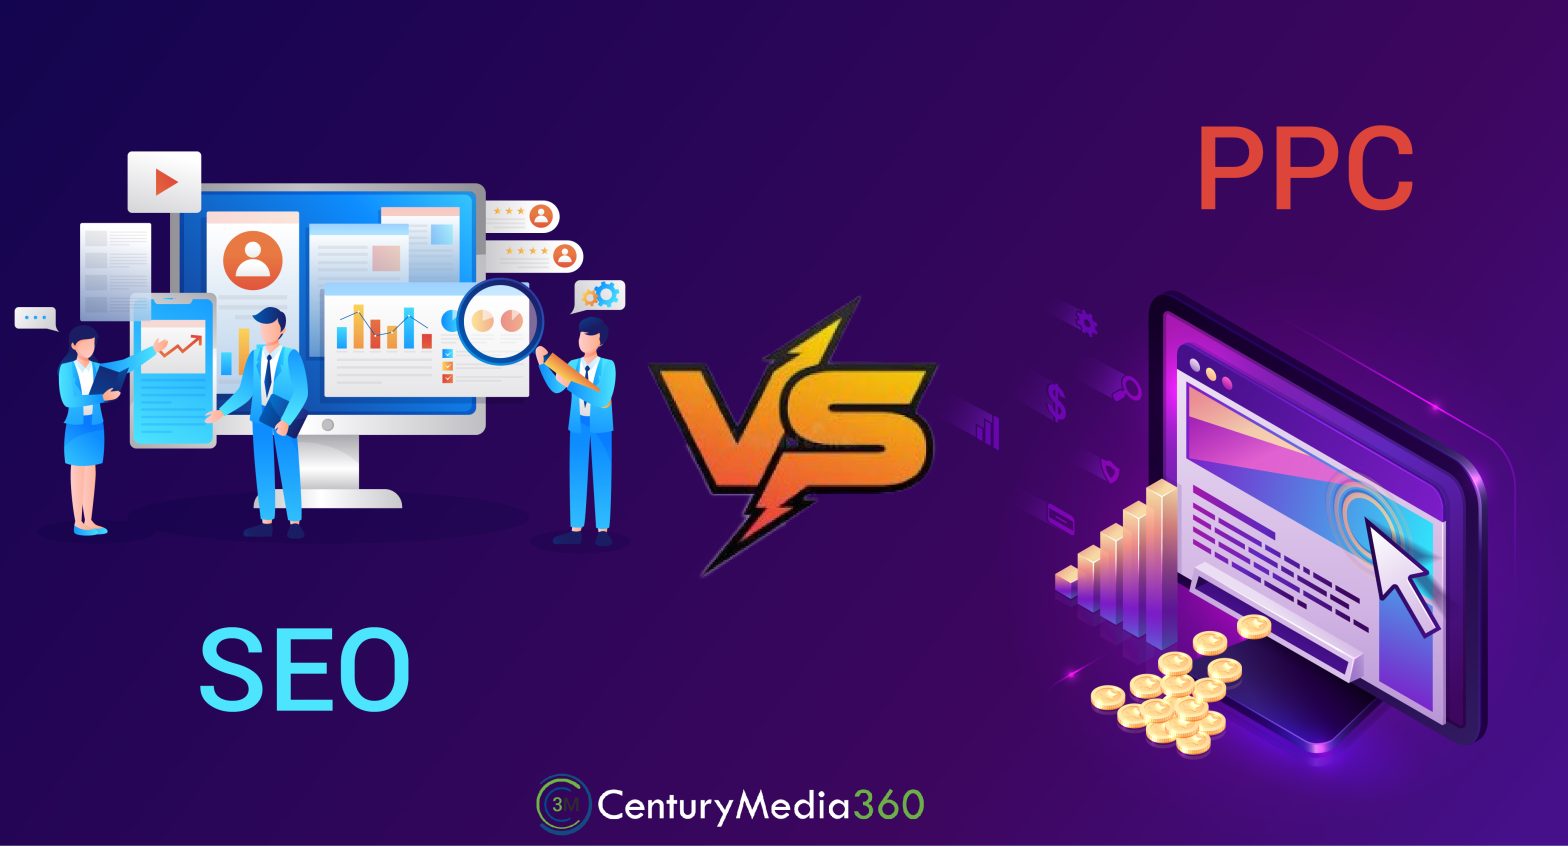 SEO vs PPC - Which One to Choose